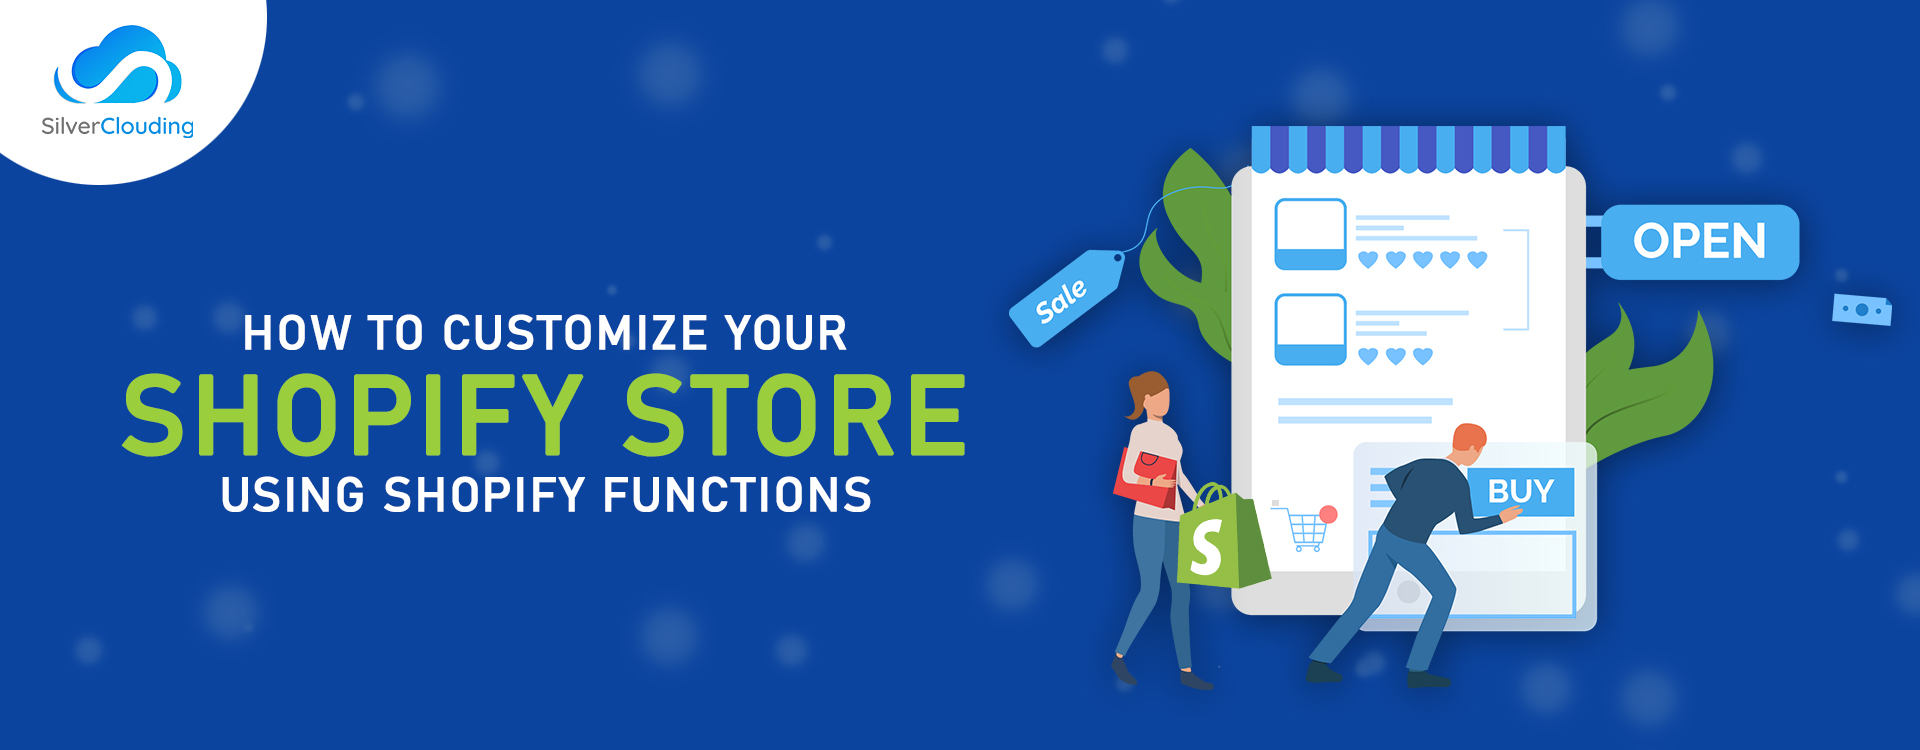 How to Customize Your Shopify Store Using Shopify Functions